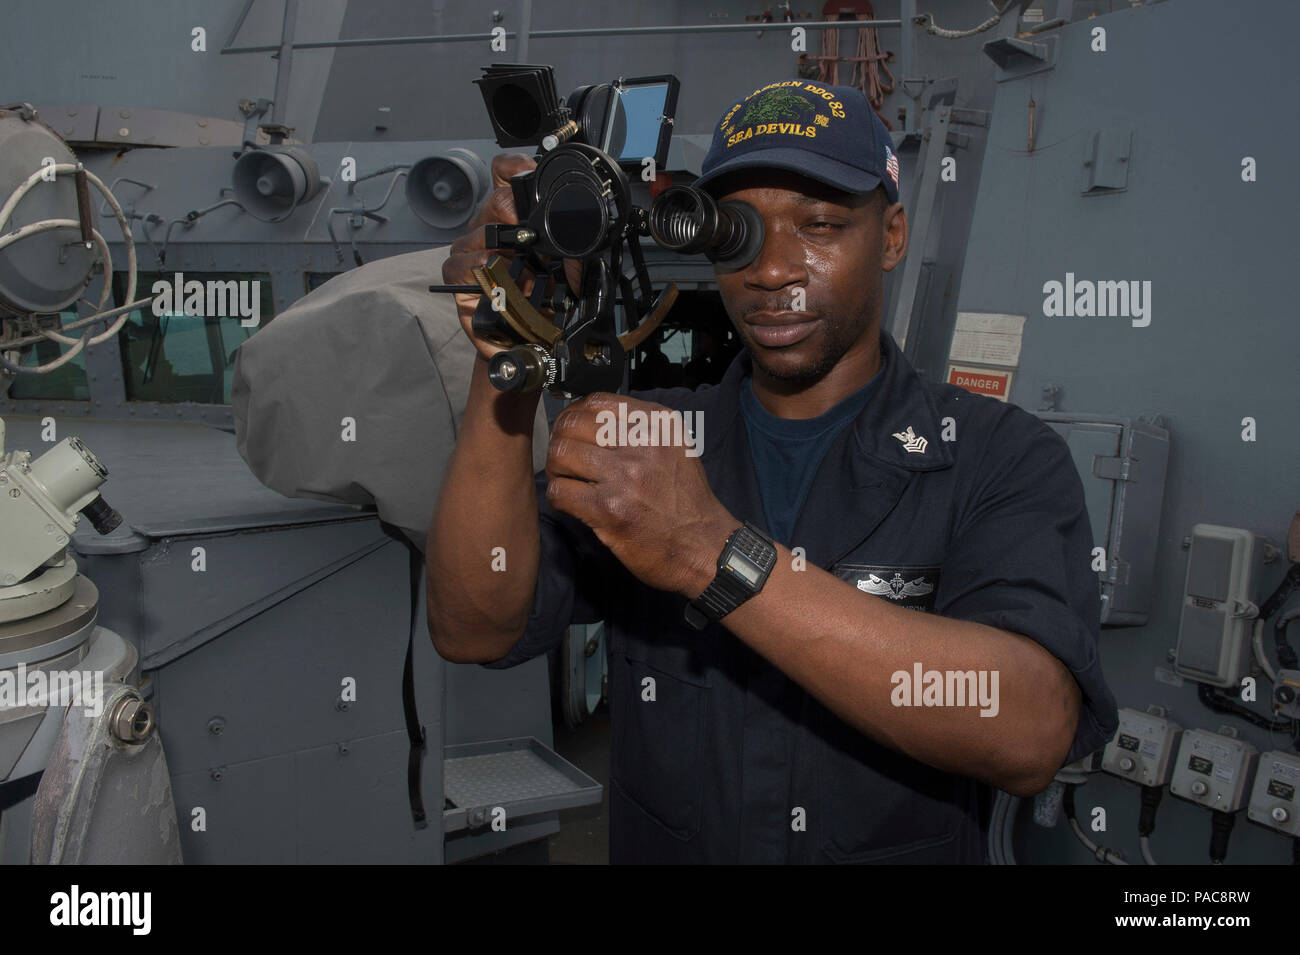 160309-N-MD297-023 PACIFIC OCEAN (March 9, 2016) - Quartermaster 1st Class John Lenson, assigned to the Arleigh Burke-class guided-missile destroyer USS Lassen (DDG 82), peers through a marine sextant, a navigational instrument used to determine celestial navigation. Lassen is deployed to the U.S. 4th Fleet area of responsibility supporting law enforcement operations as part of Operation Martillo. (U.S. Navy photo by Mass Communication Specialist 2nd Class Huey D. Younger Jr./Released) Stock Photo